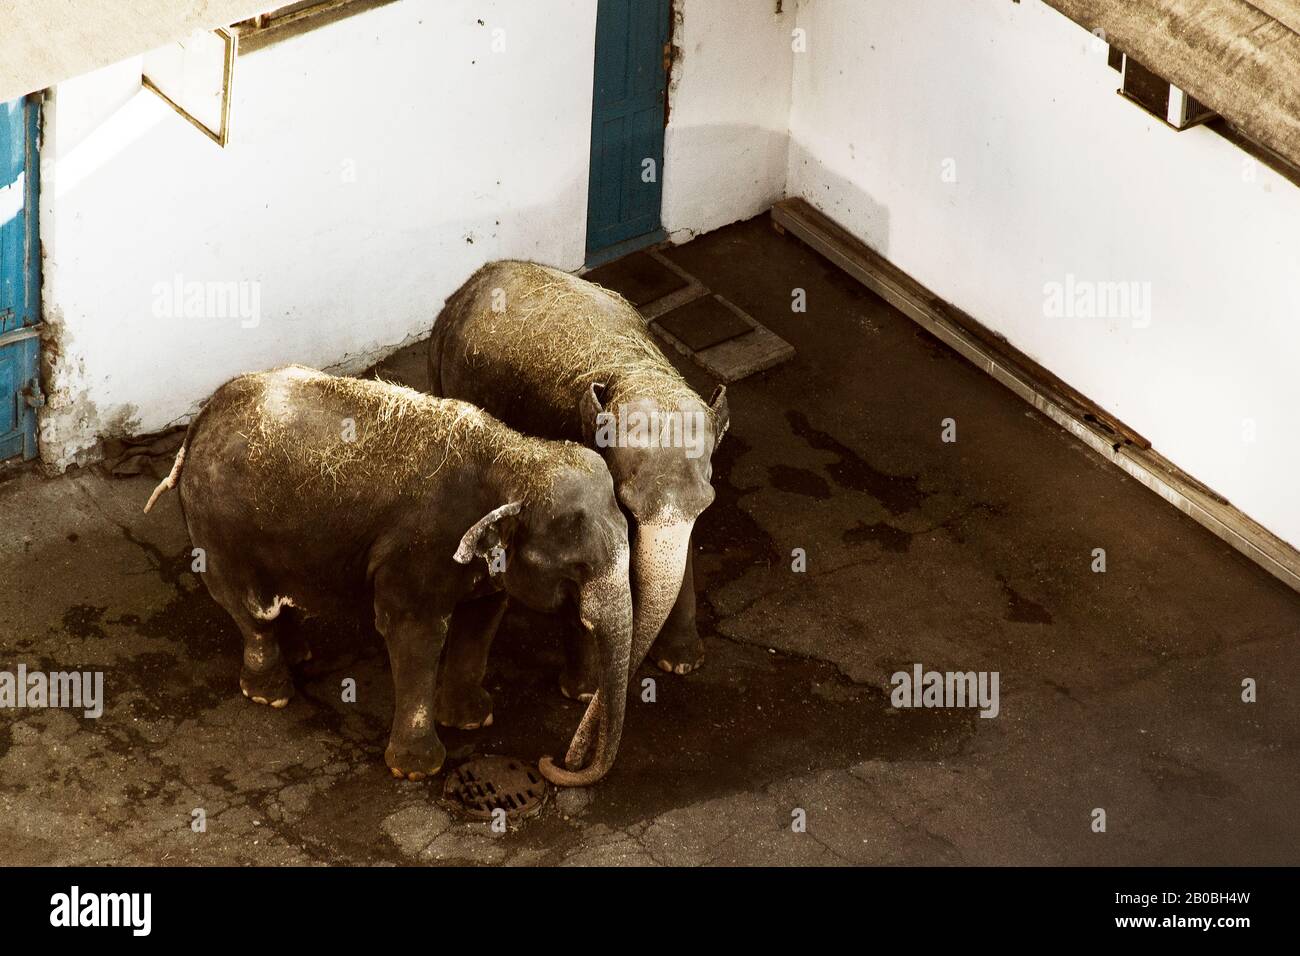 stop animal cruelty. Two elephants embracing with trunks in old and dirty cirus courtyard Stock Photo